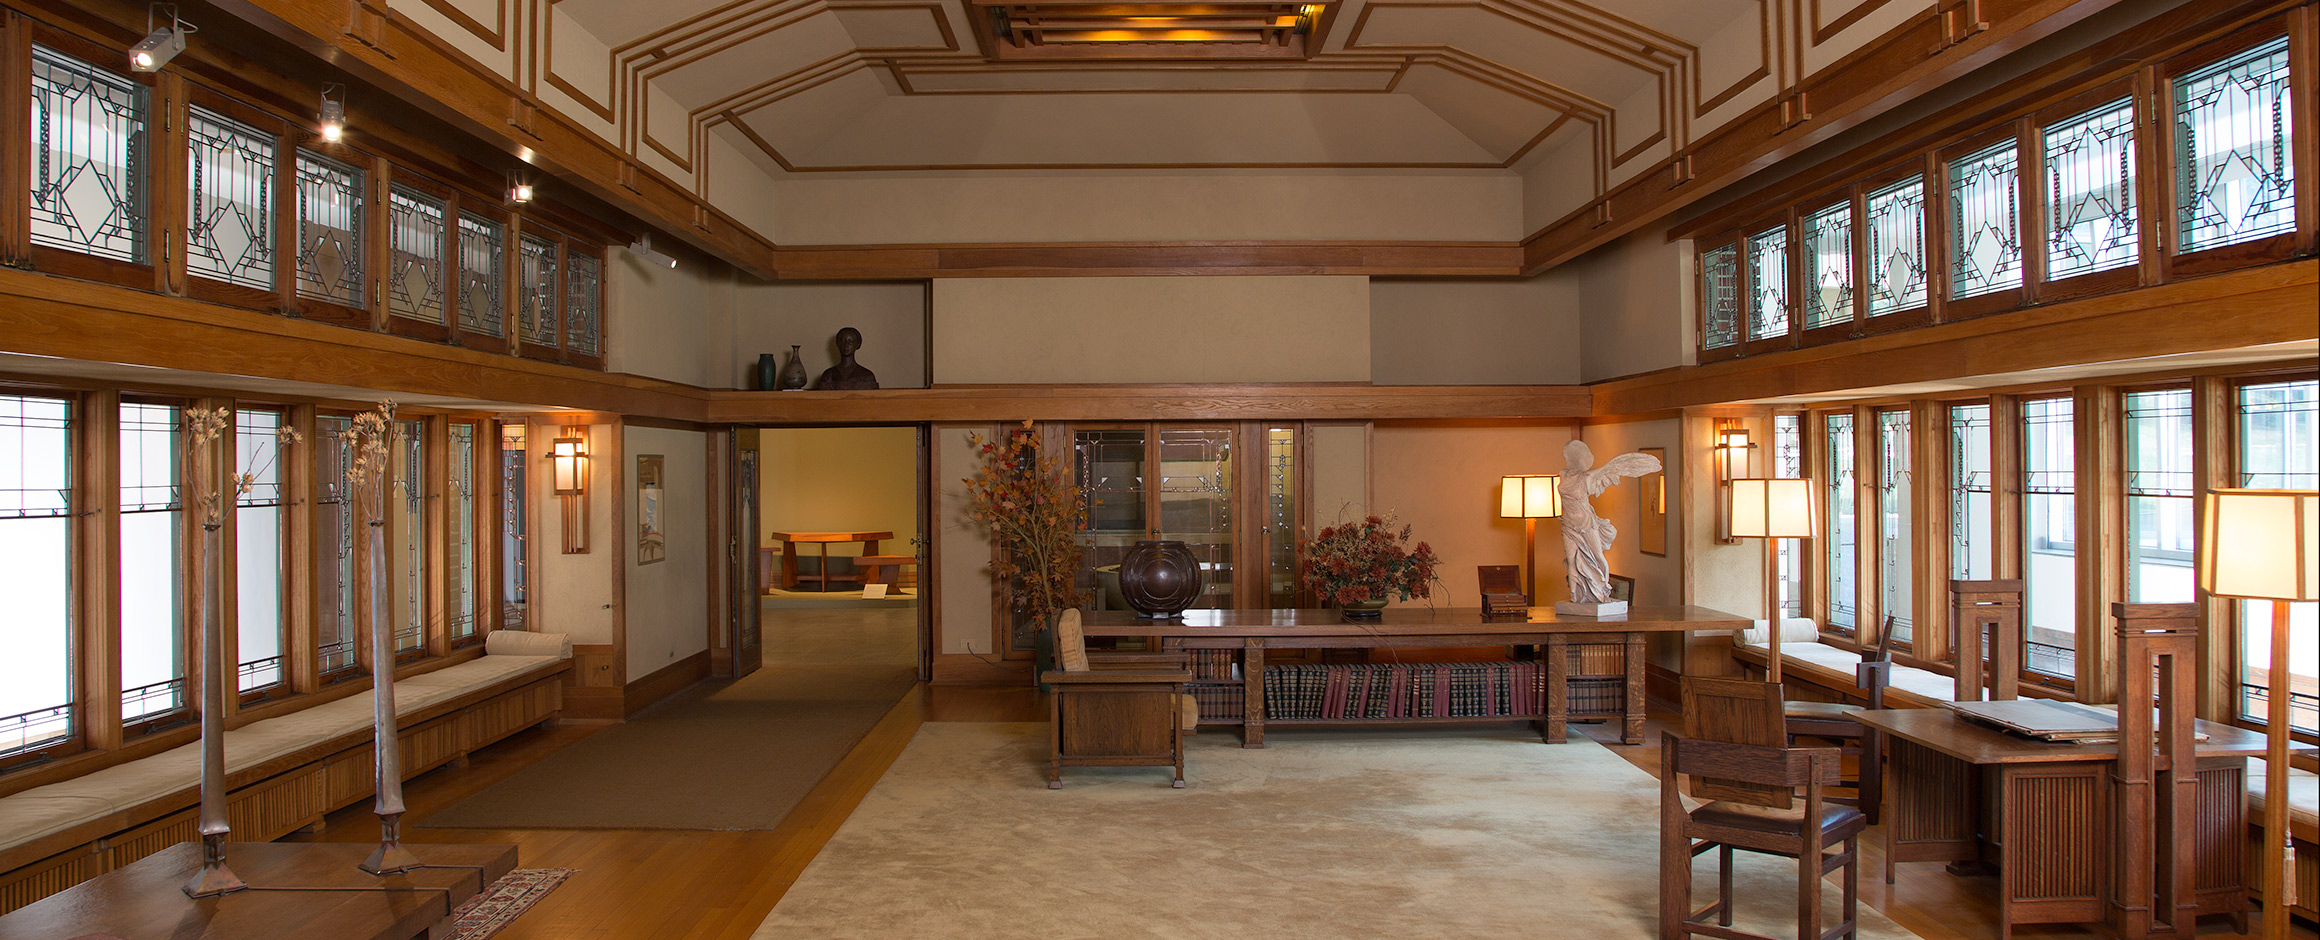 12 Famous Frank Lloyd Wright Houses Offer Virtual Tours: Hollyhock House, Taliesin West ...